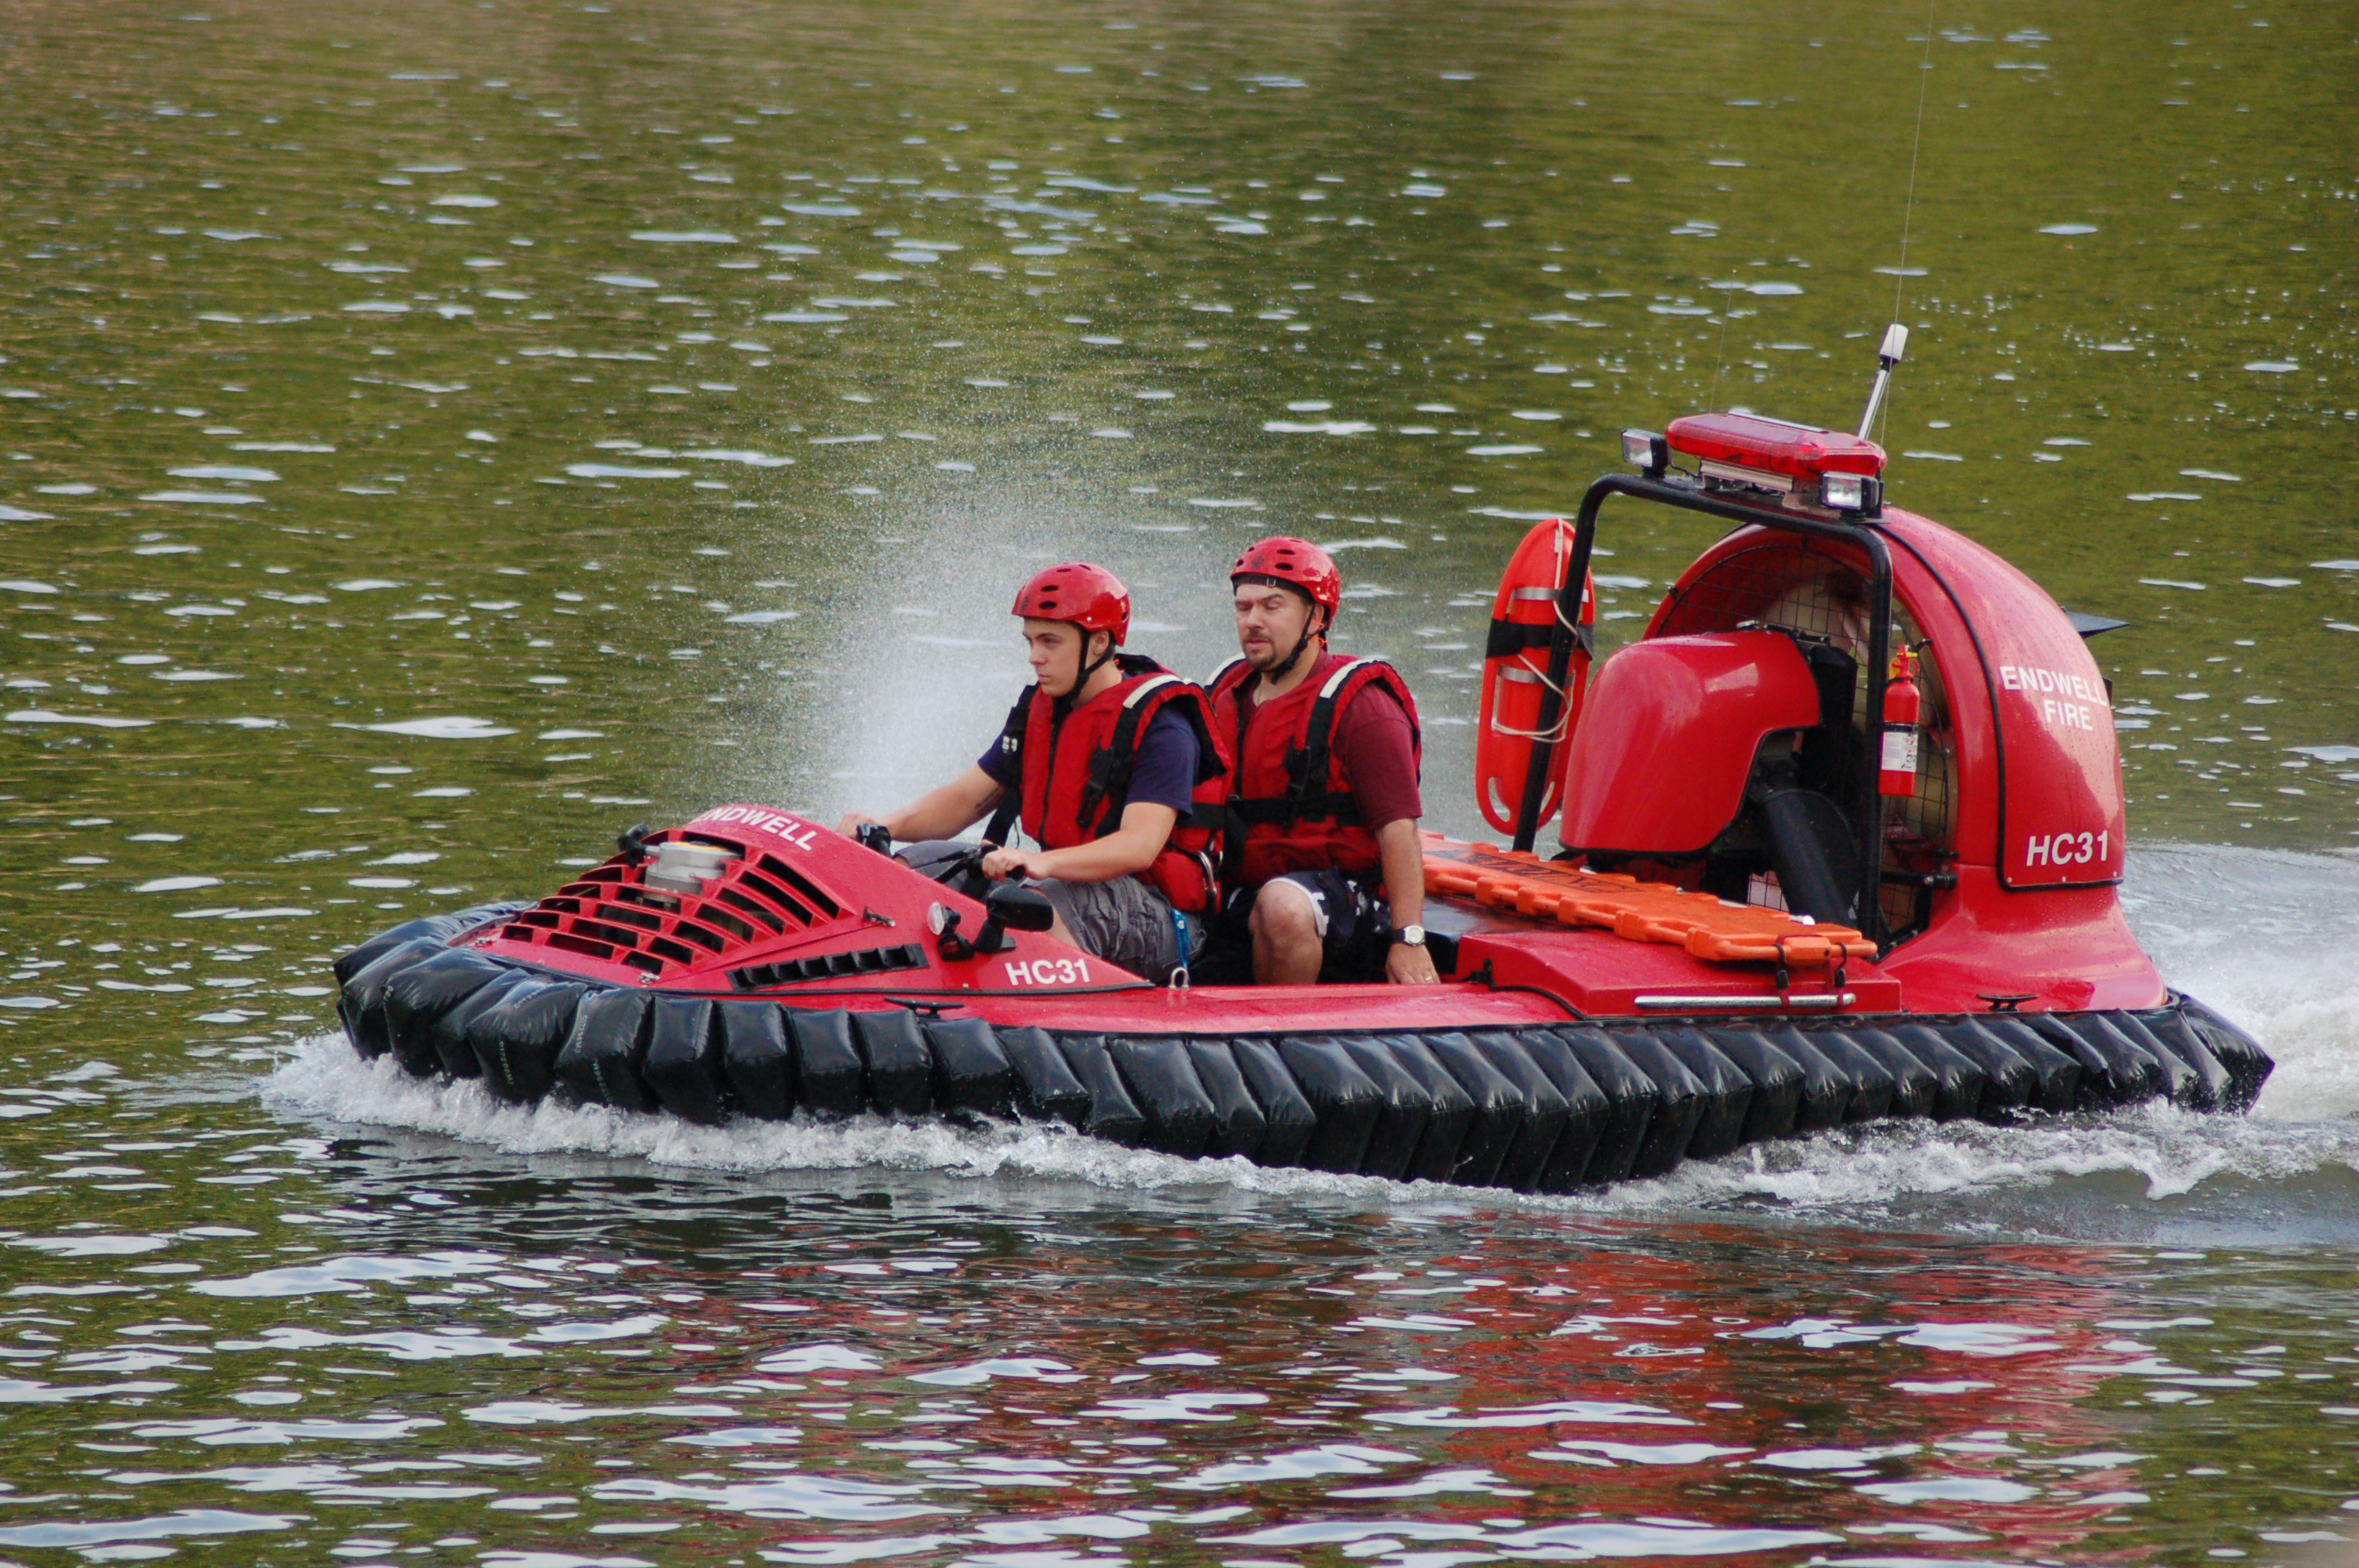 06-20-11  Training - Water Rescue